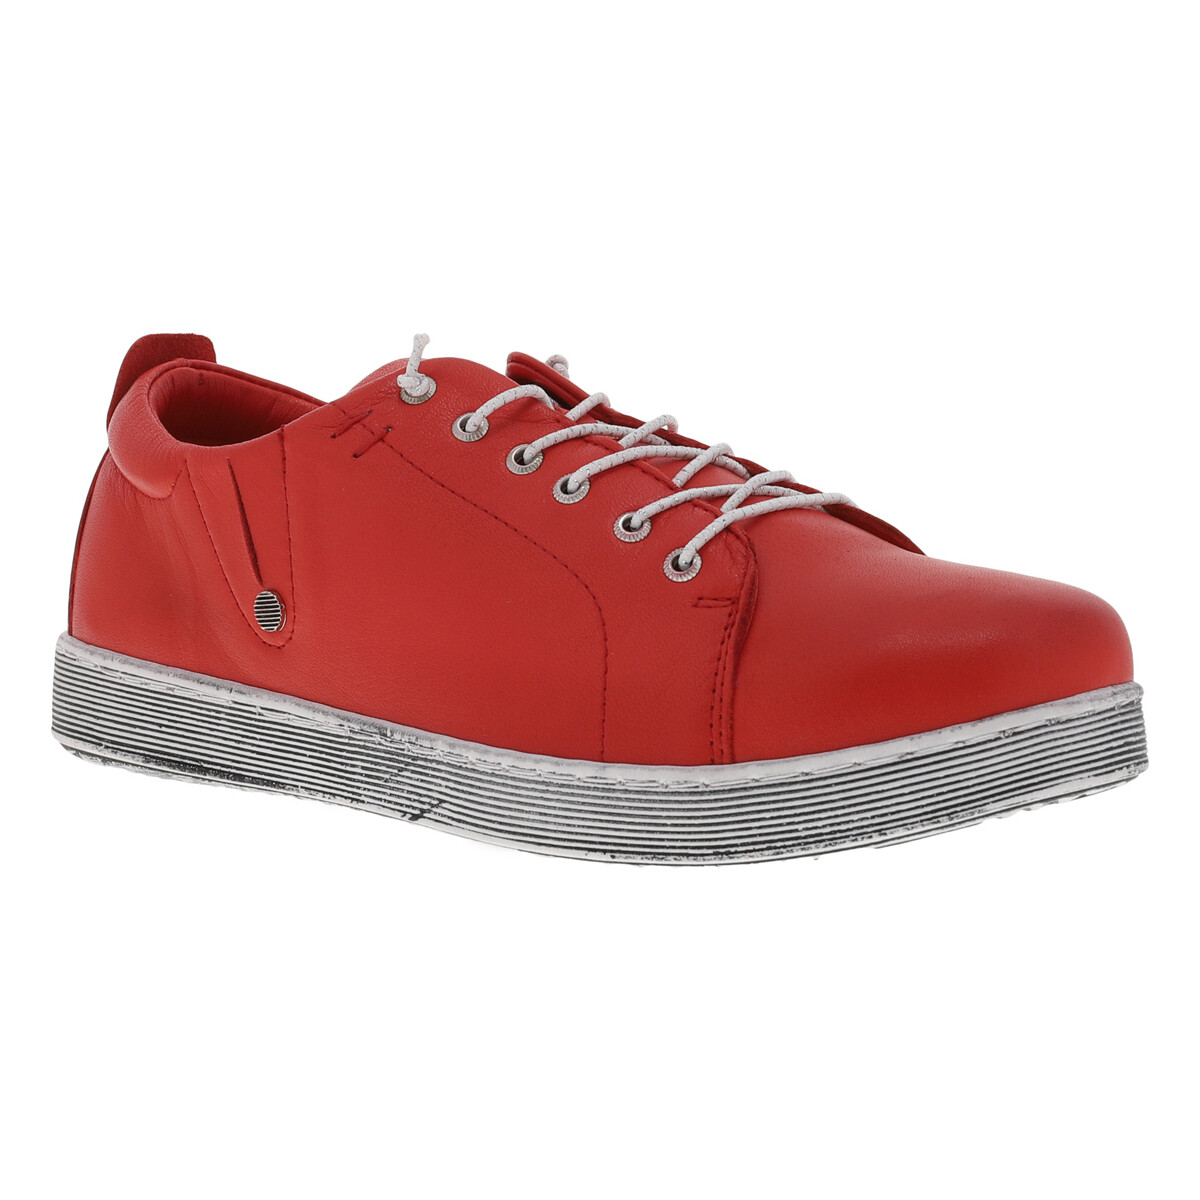 Chaussures Femme Baskets mode Andrea Conti Baskets cuir Rouge